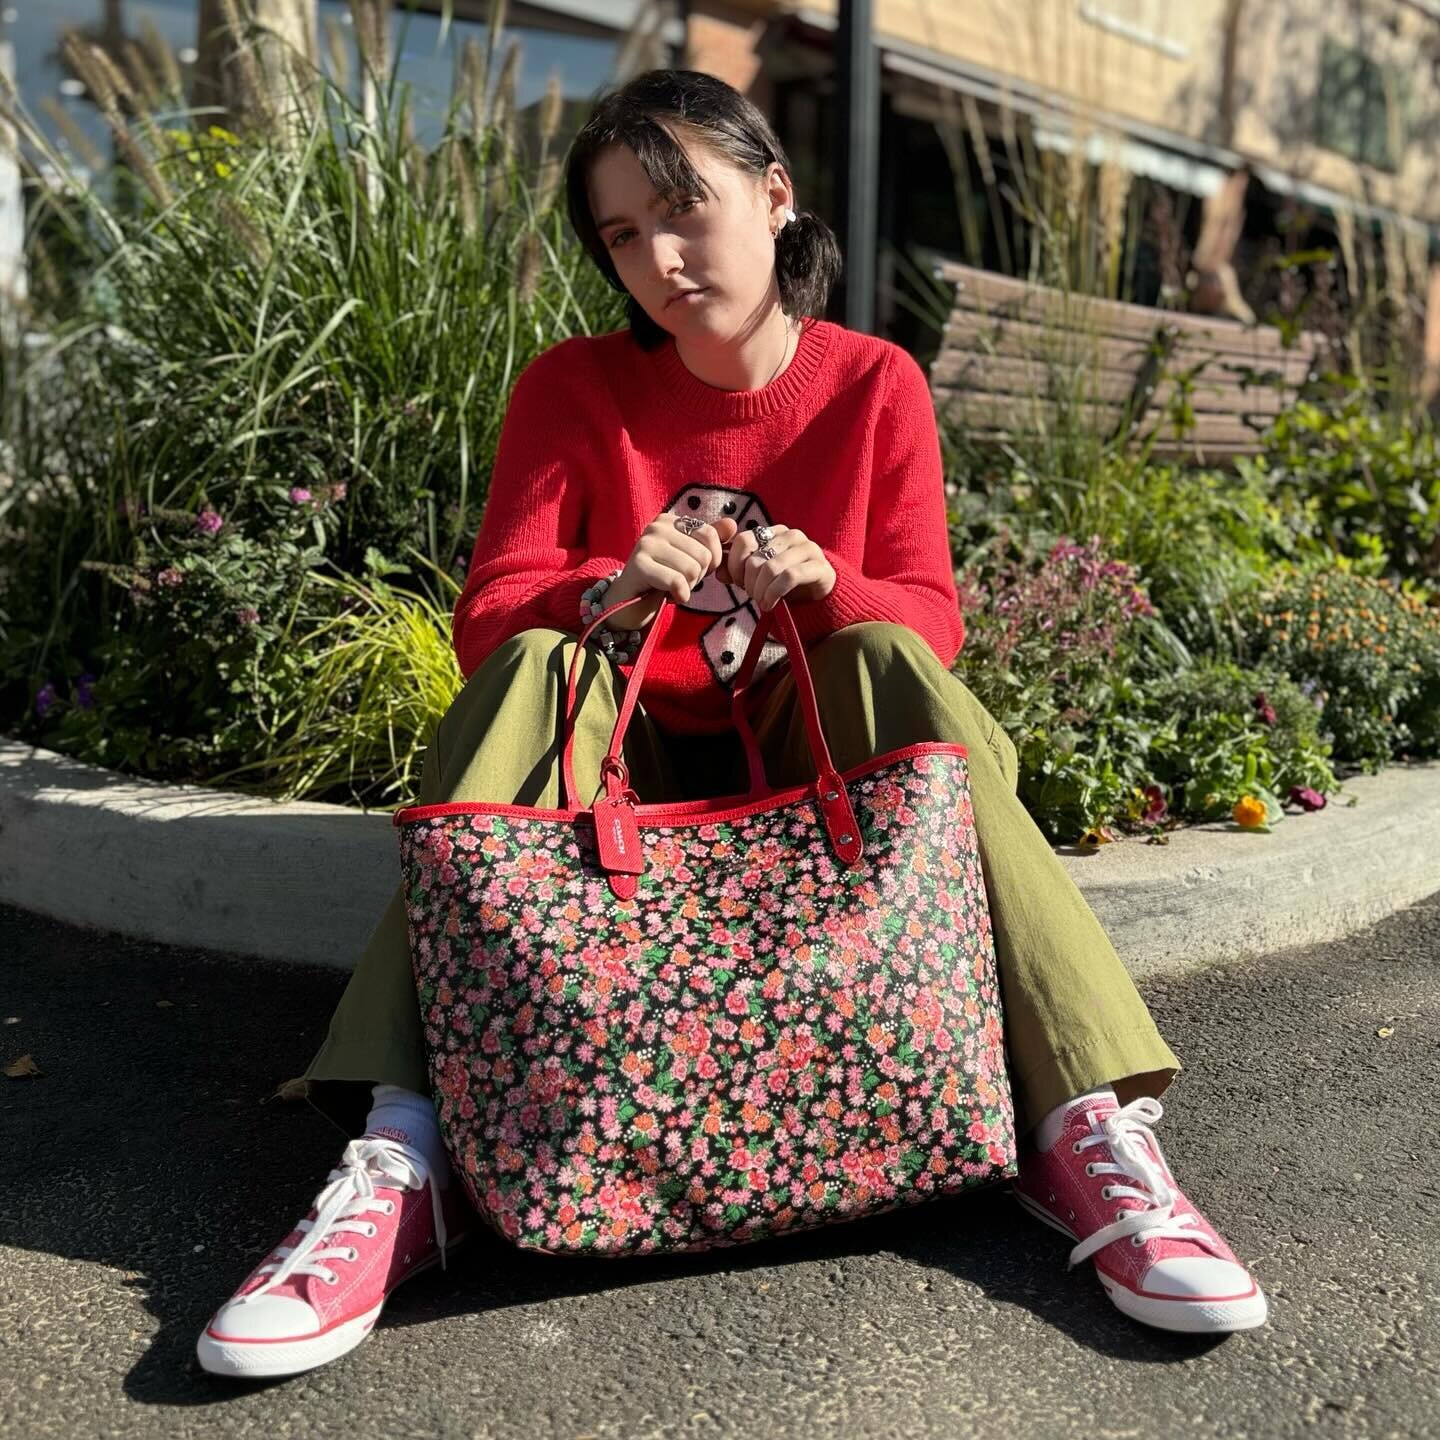 What&rsquo;s new this week at Greene Street? Roll the dice and find out 🎲 

Shop the look:

Designer peony print tote: $68.95

Designer alpaca wool sweater with dice: size small, $34.95

NWT baggy Levi&rsquo;s: size 27, $23.95

Converse red lowtops: